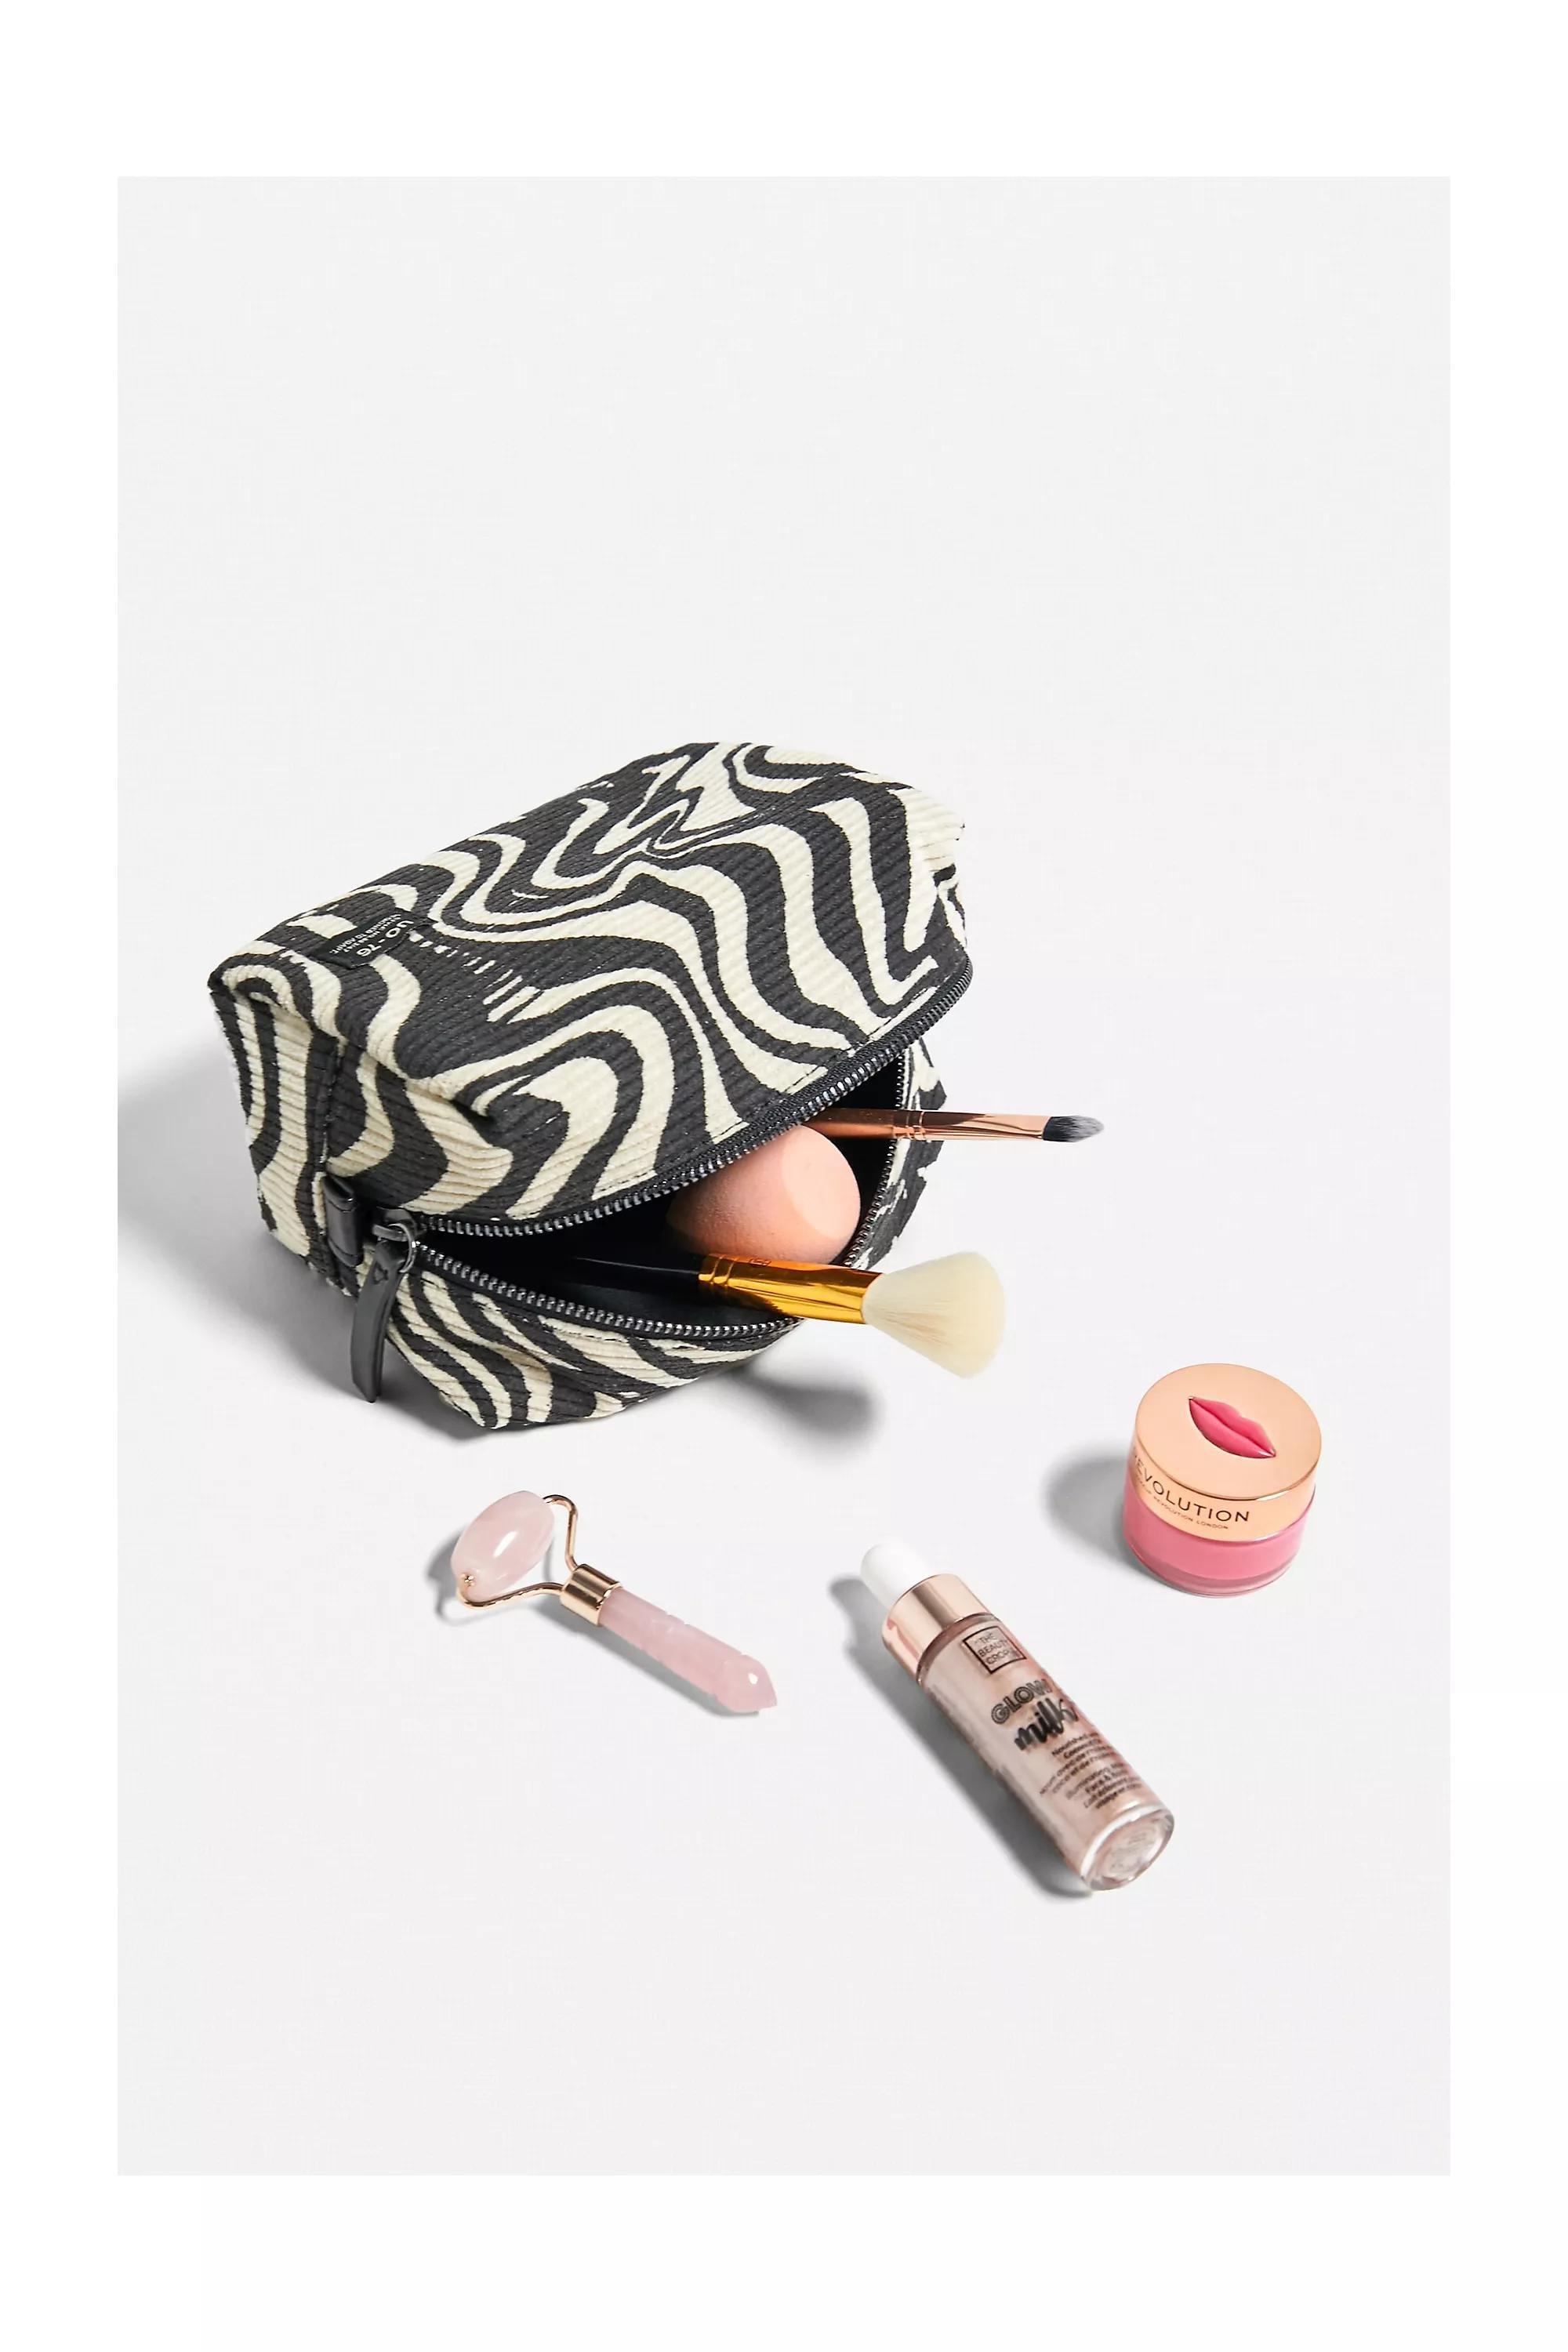 Urban Outfitters - Black Printed Cord Make Up Bag